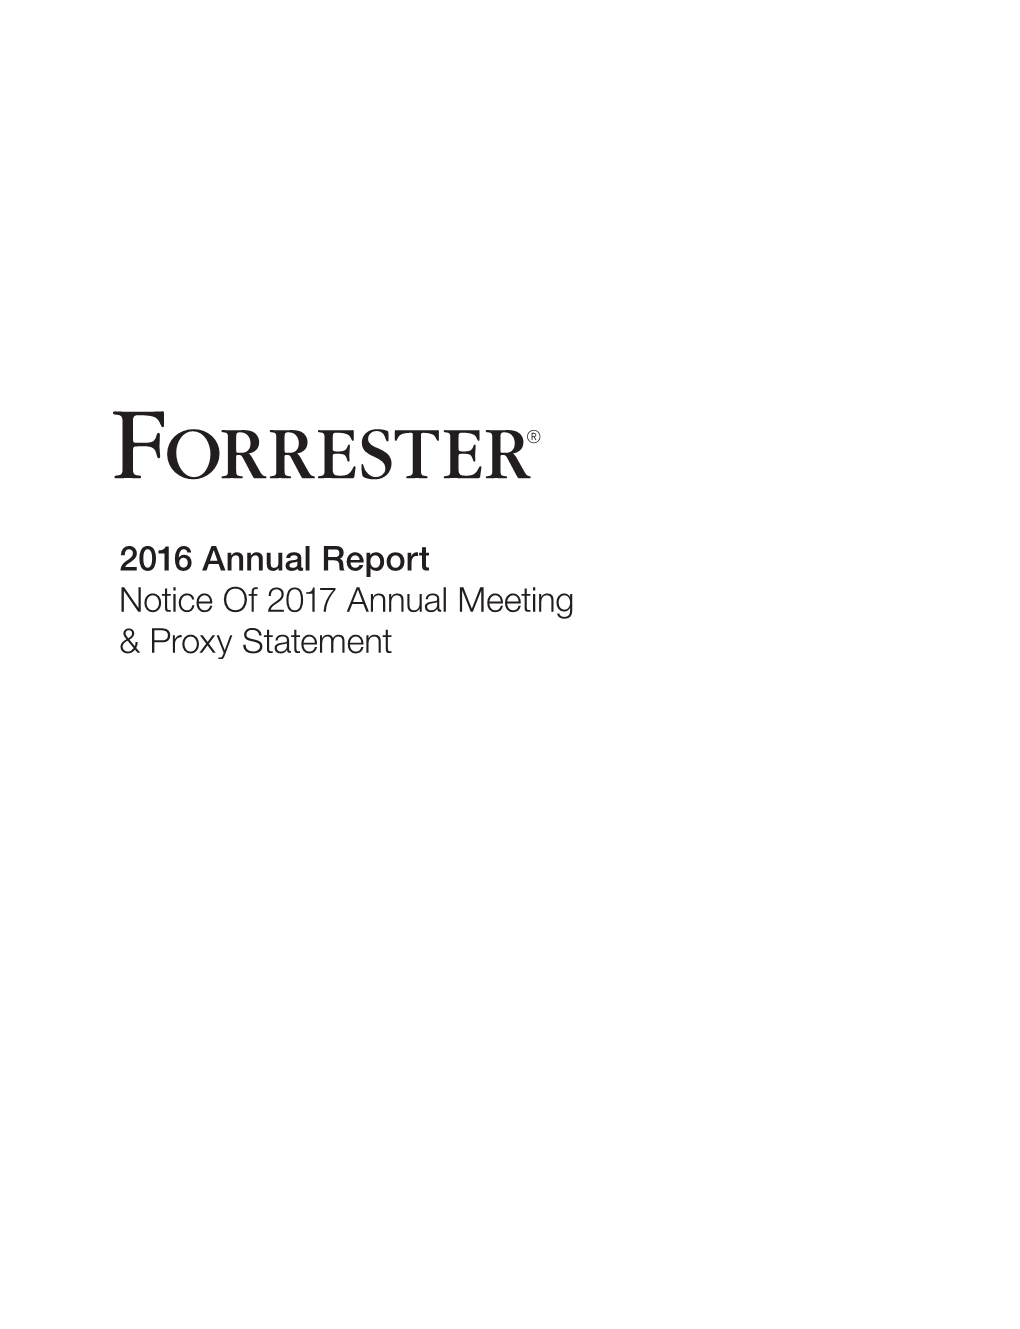 Forrester Research, Inc. 2016 Annual Report